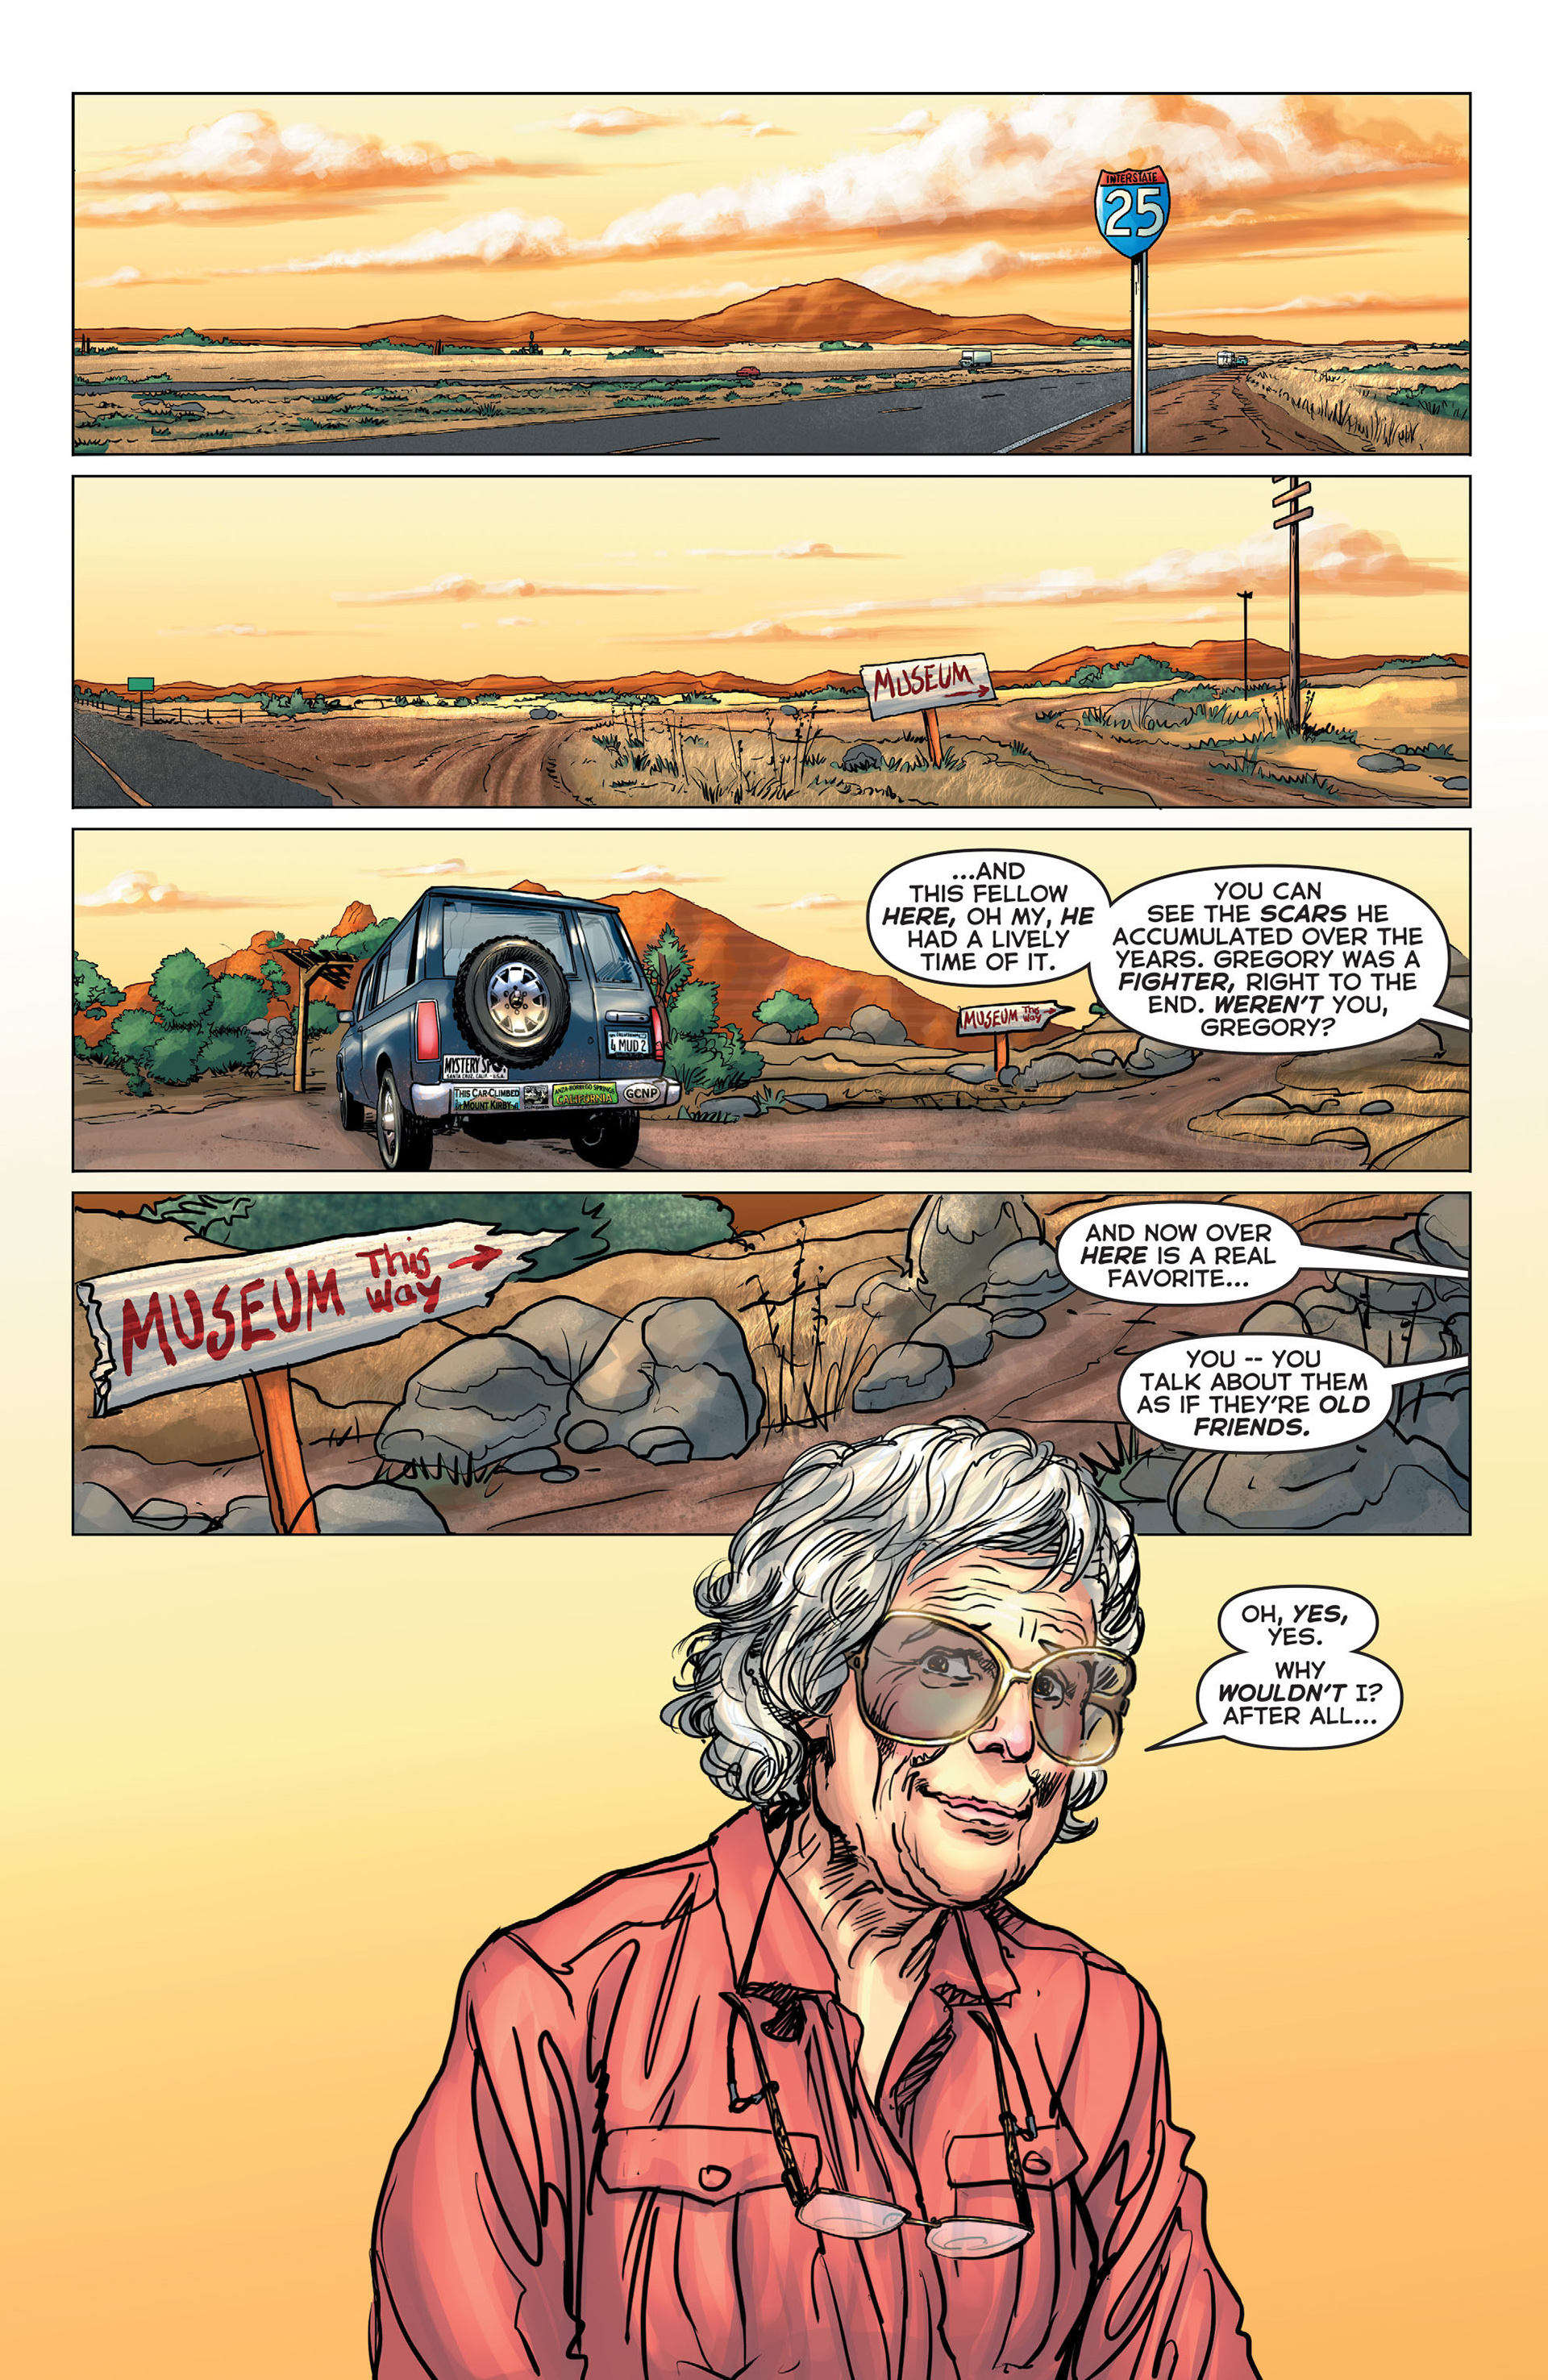 Astro City (2013-): Chapter 14 - Page 2